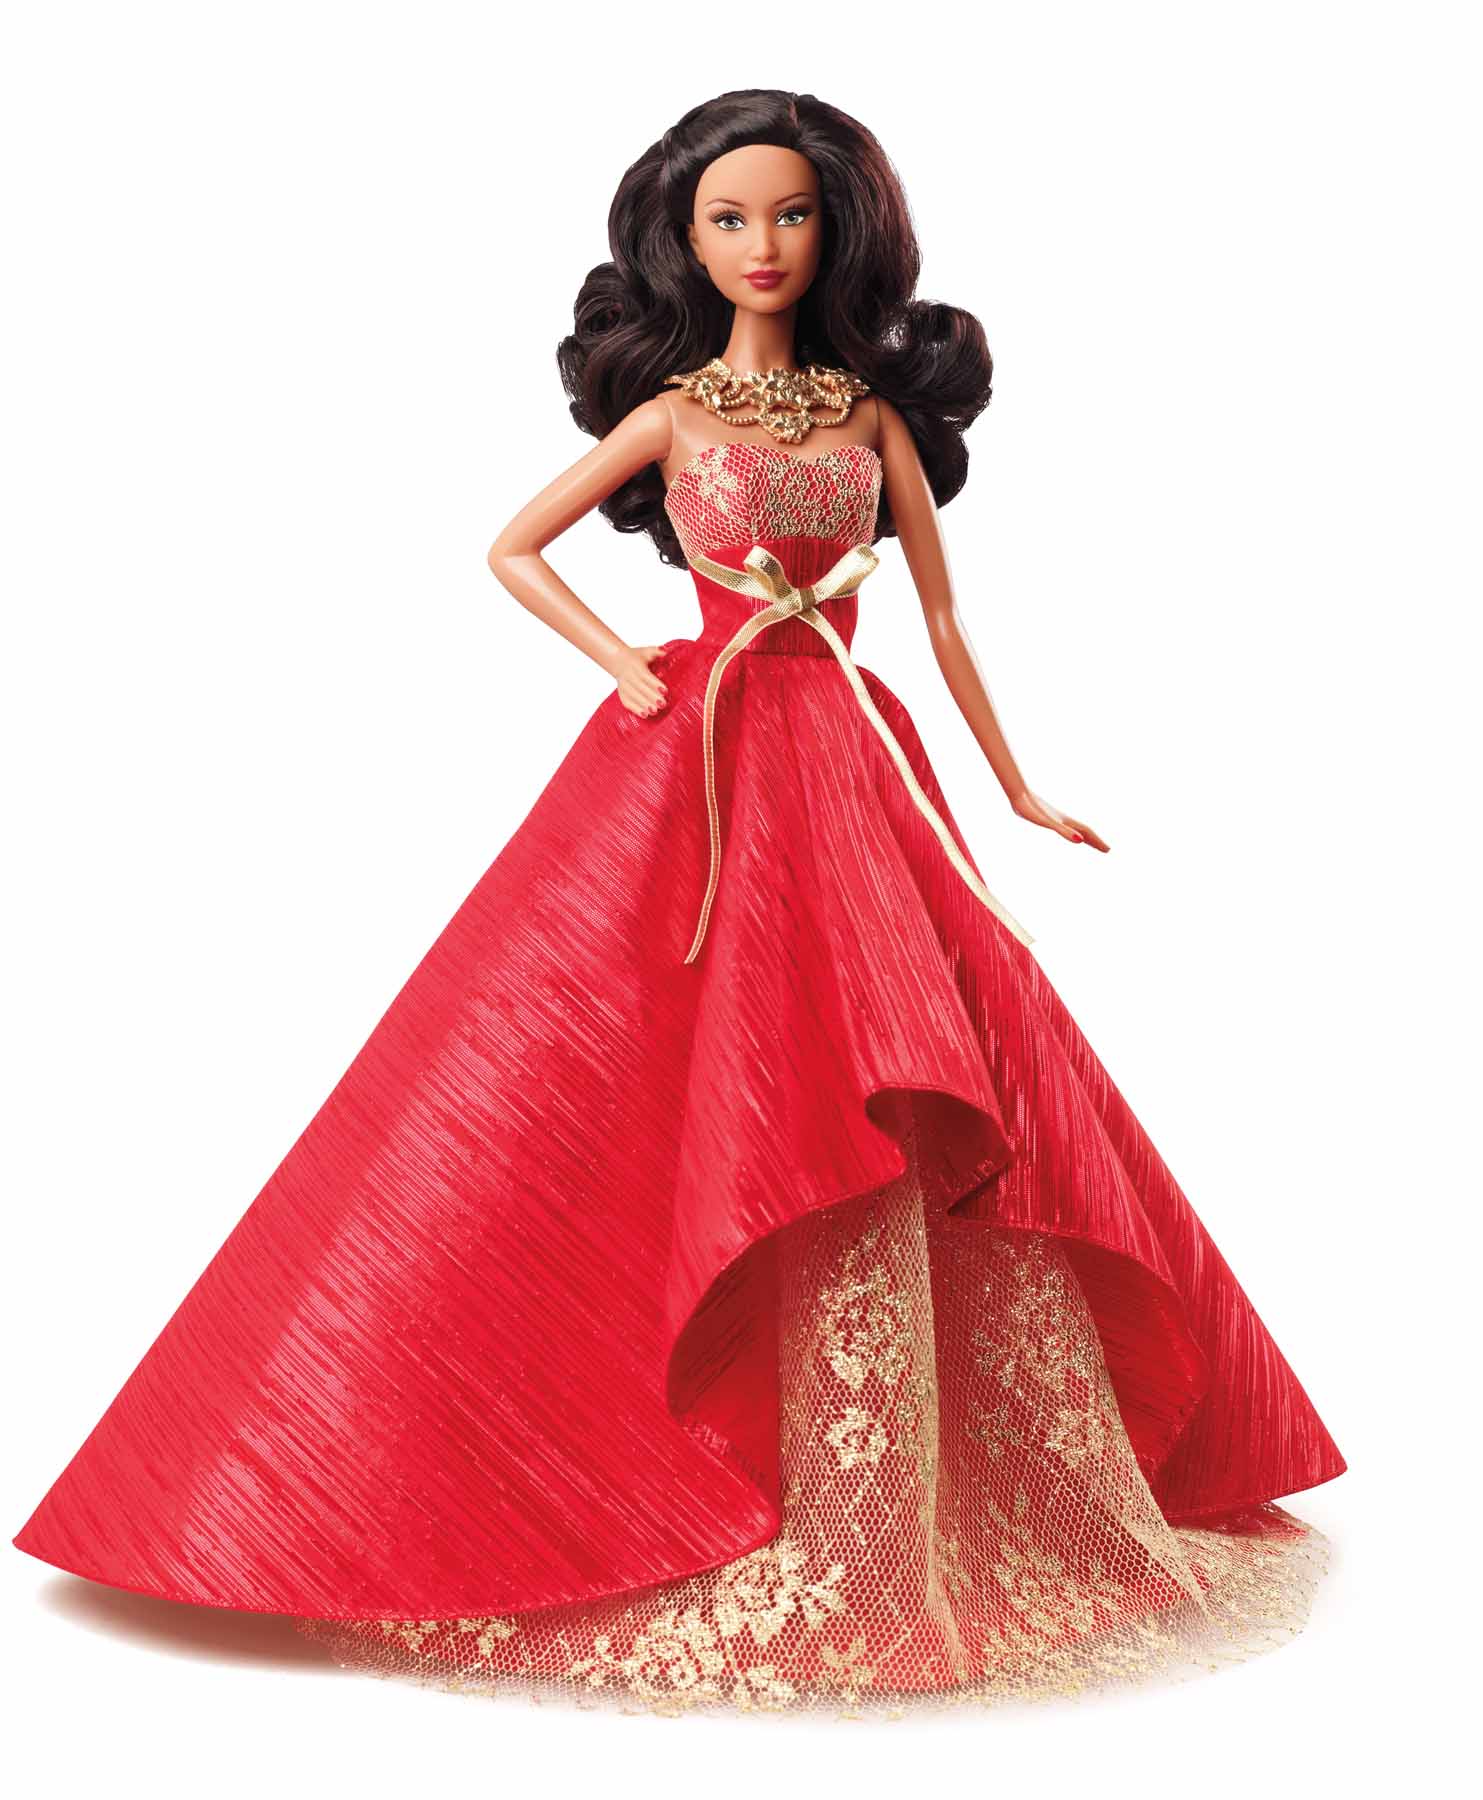 holiday barbie 2018 african american